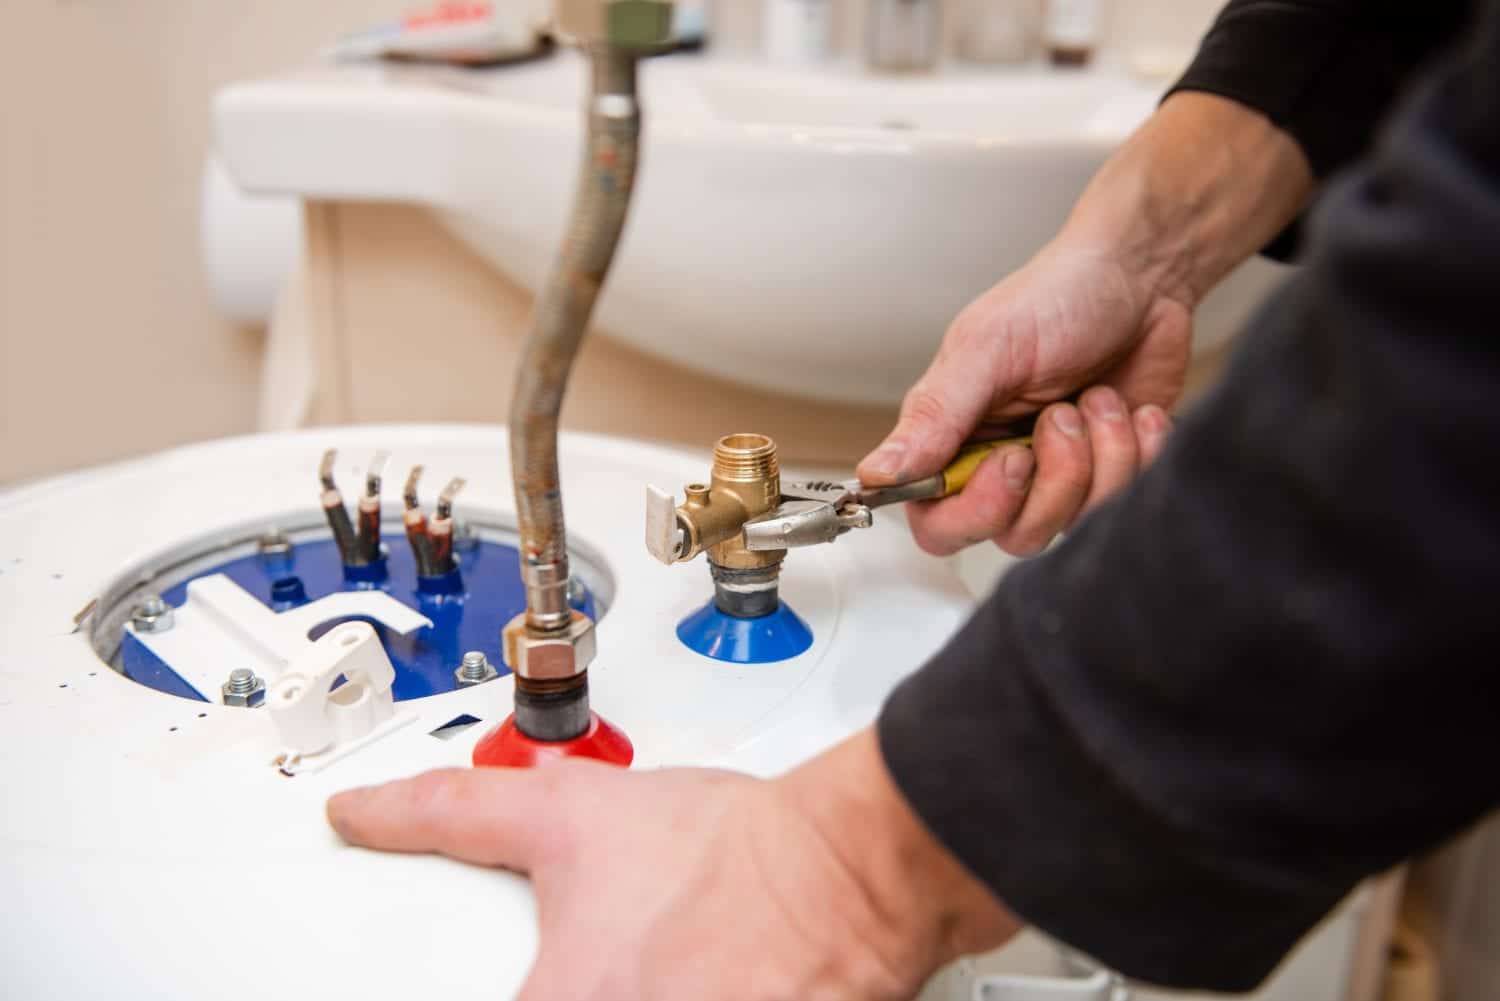 Why Water Heater Replacement Is Best Left To The Professionals